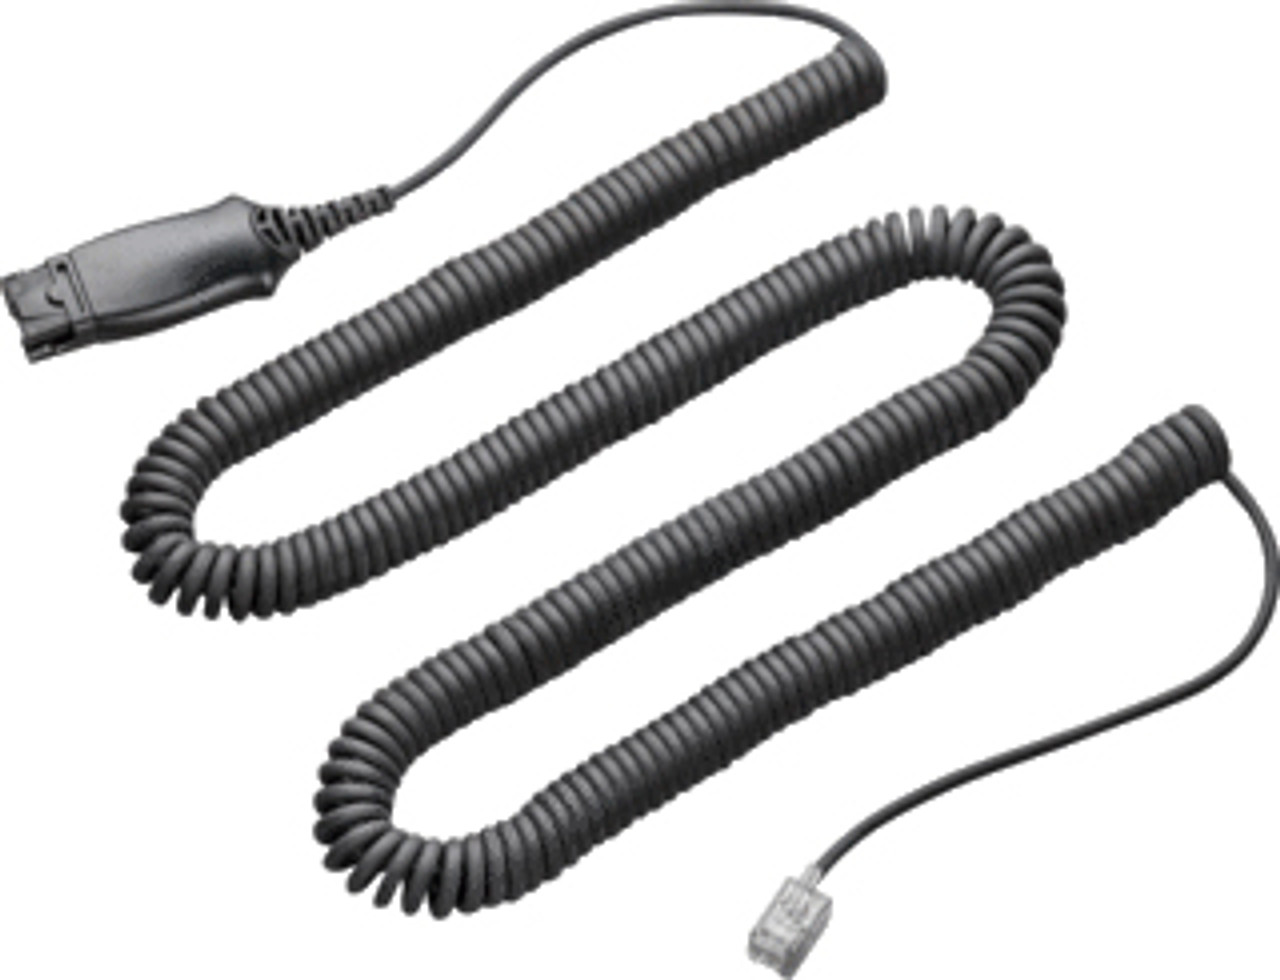 Plantronics 72442-41 Black cable interface/gender adapter